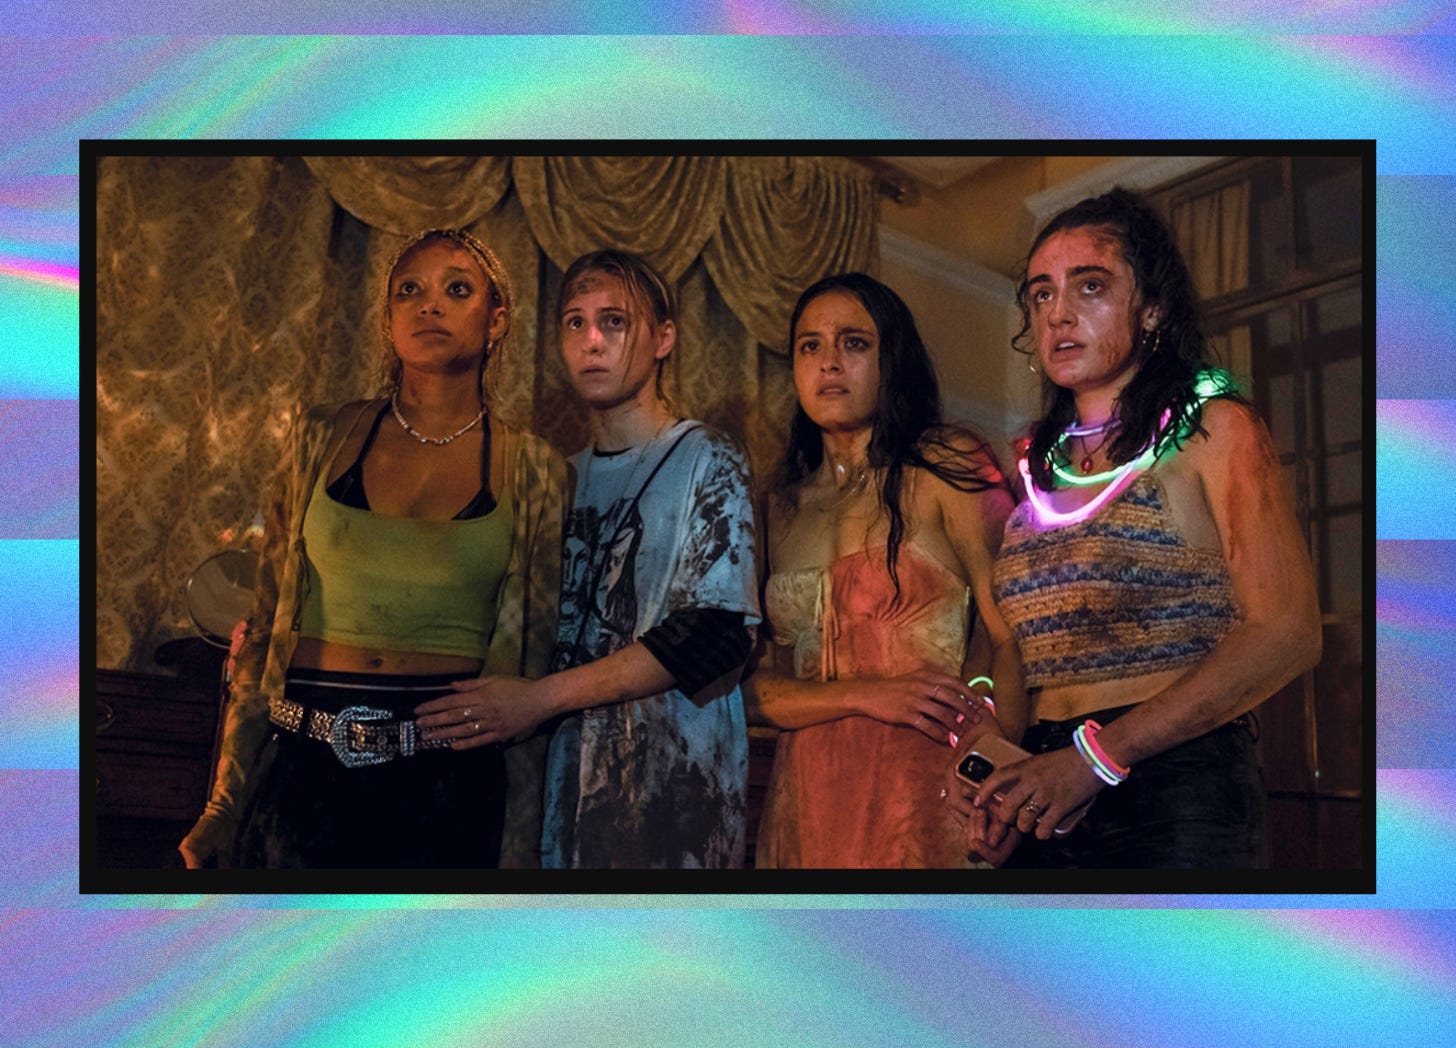 A screenshot from Bodies Bodies Bodies overlaid on a groovy purple and blue background. The screenshot shows four of the main characters standing shoulder to shoulder, in various states of dishevelment. The women - wearing colorful, modern clothing, one with an array of glow stick necklaces - are looking in terror at something just off-screen.